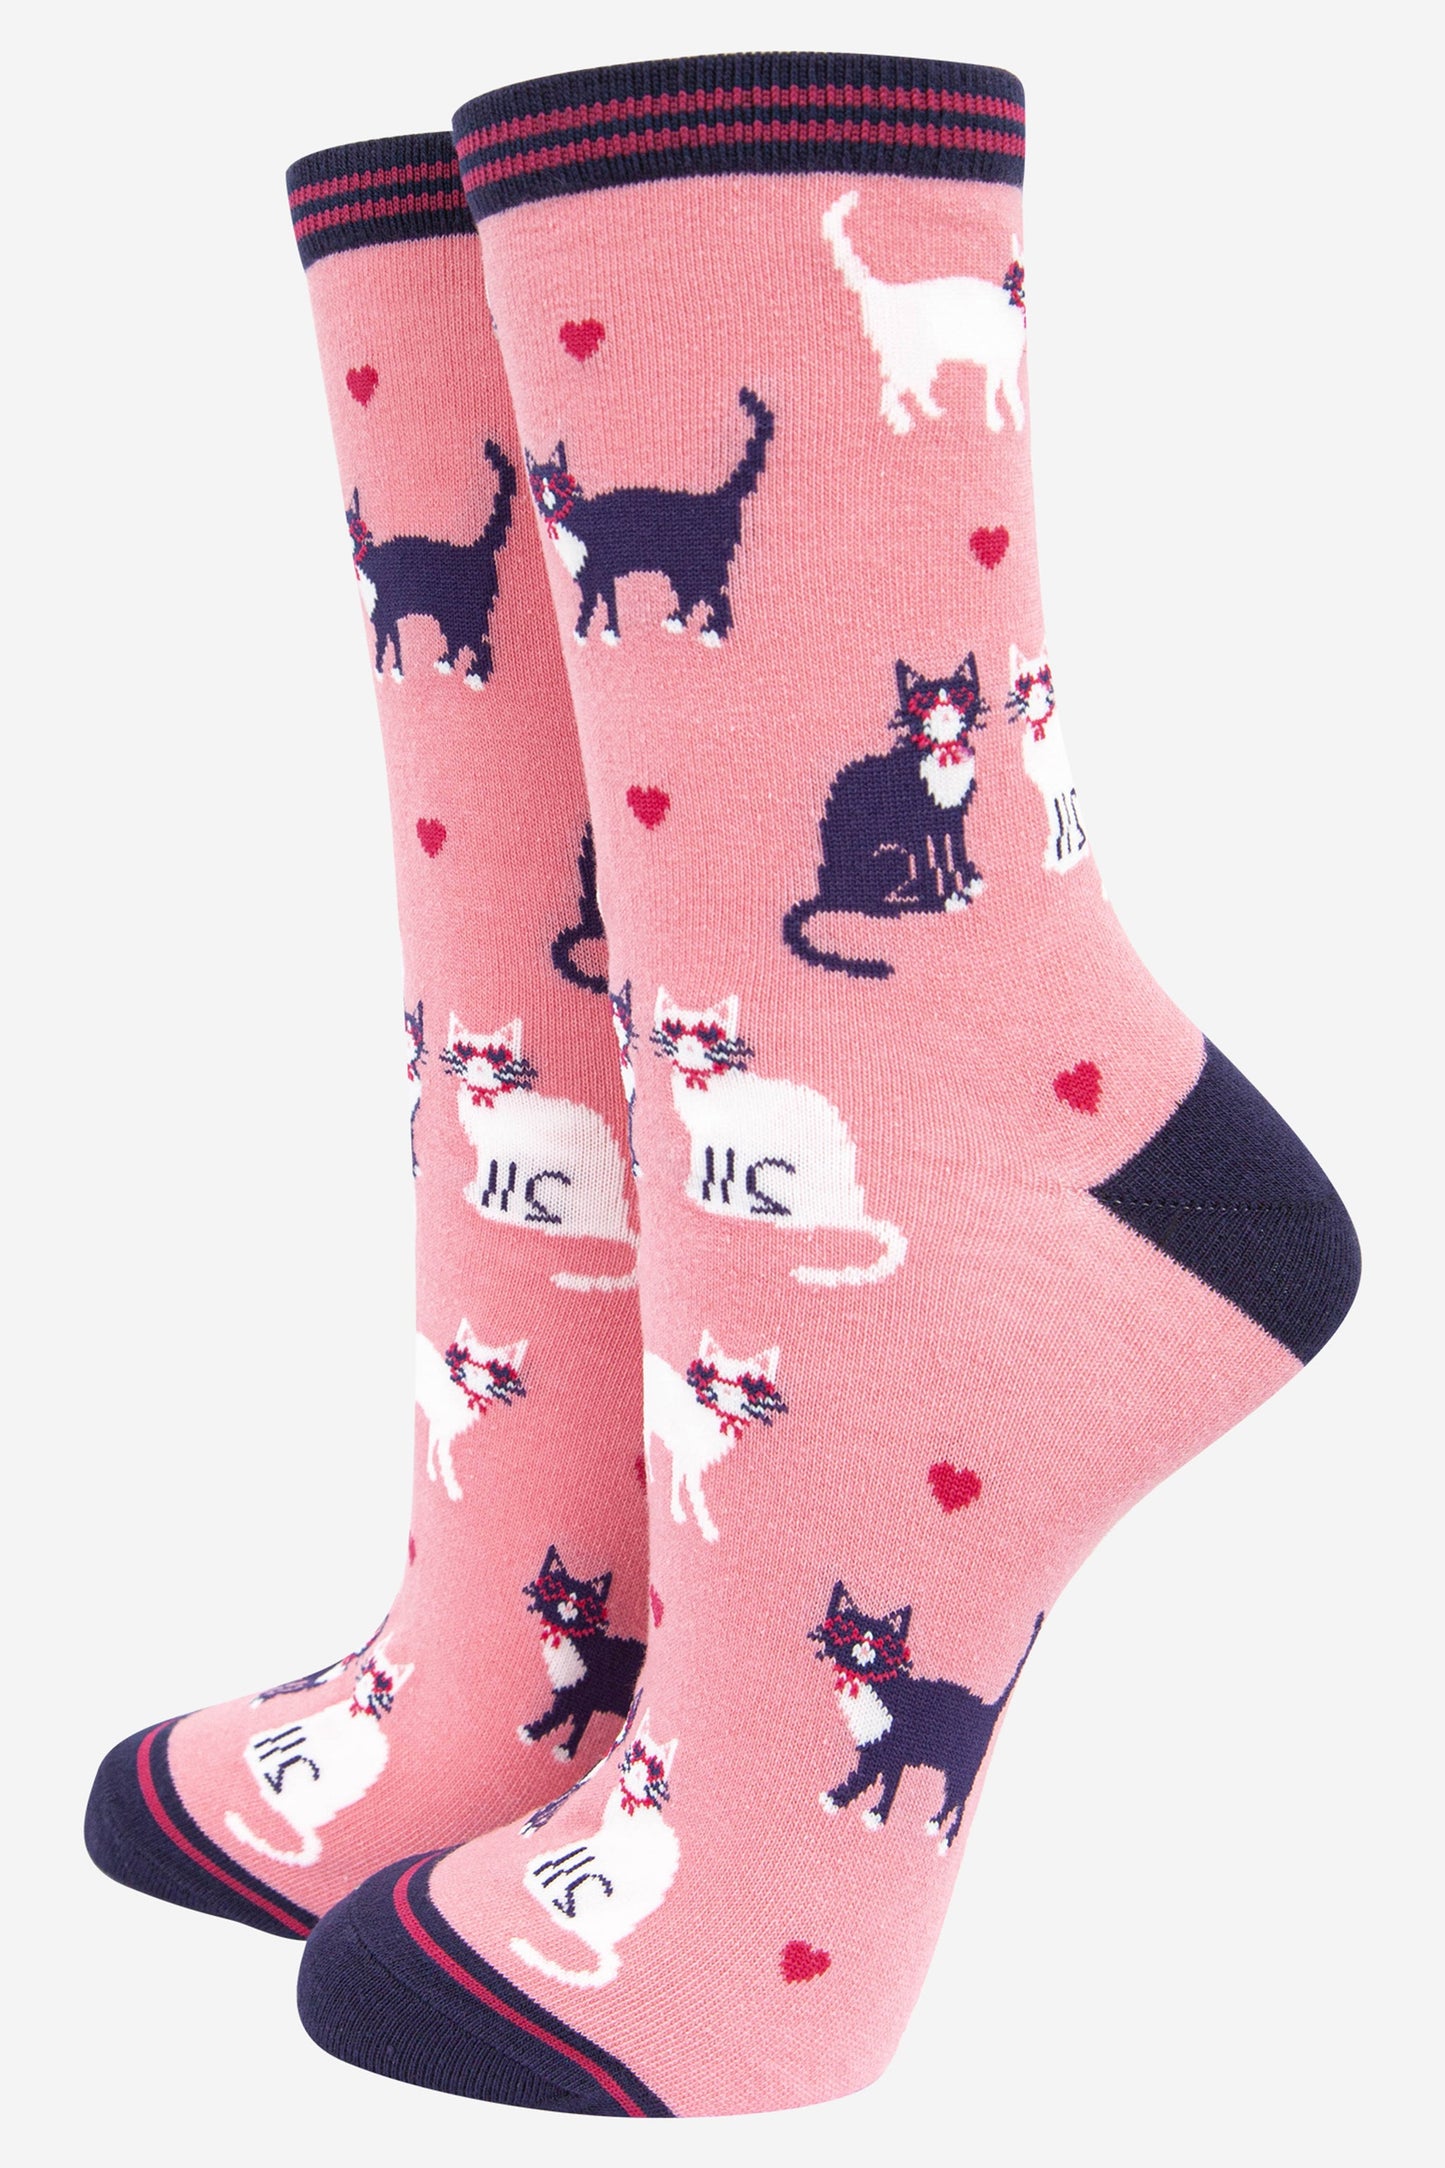 pink bamboo socks with a pattern of white and blue cats and red love hearts all over